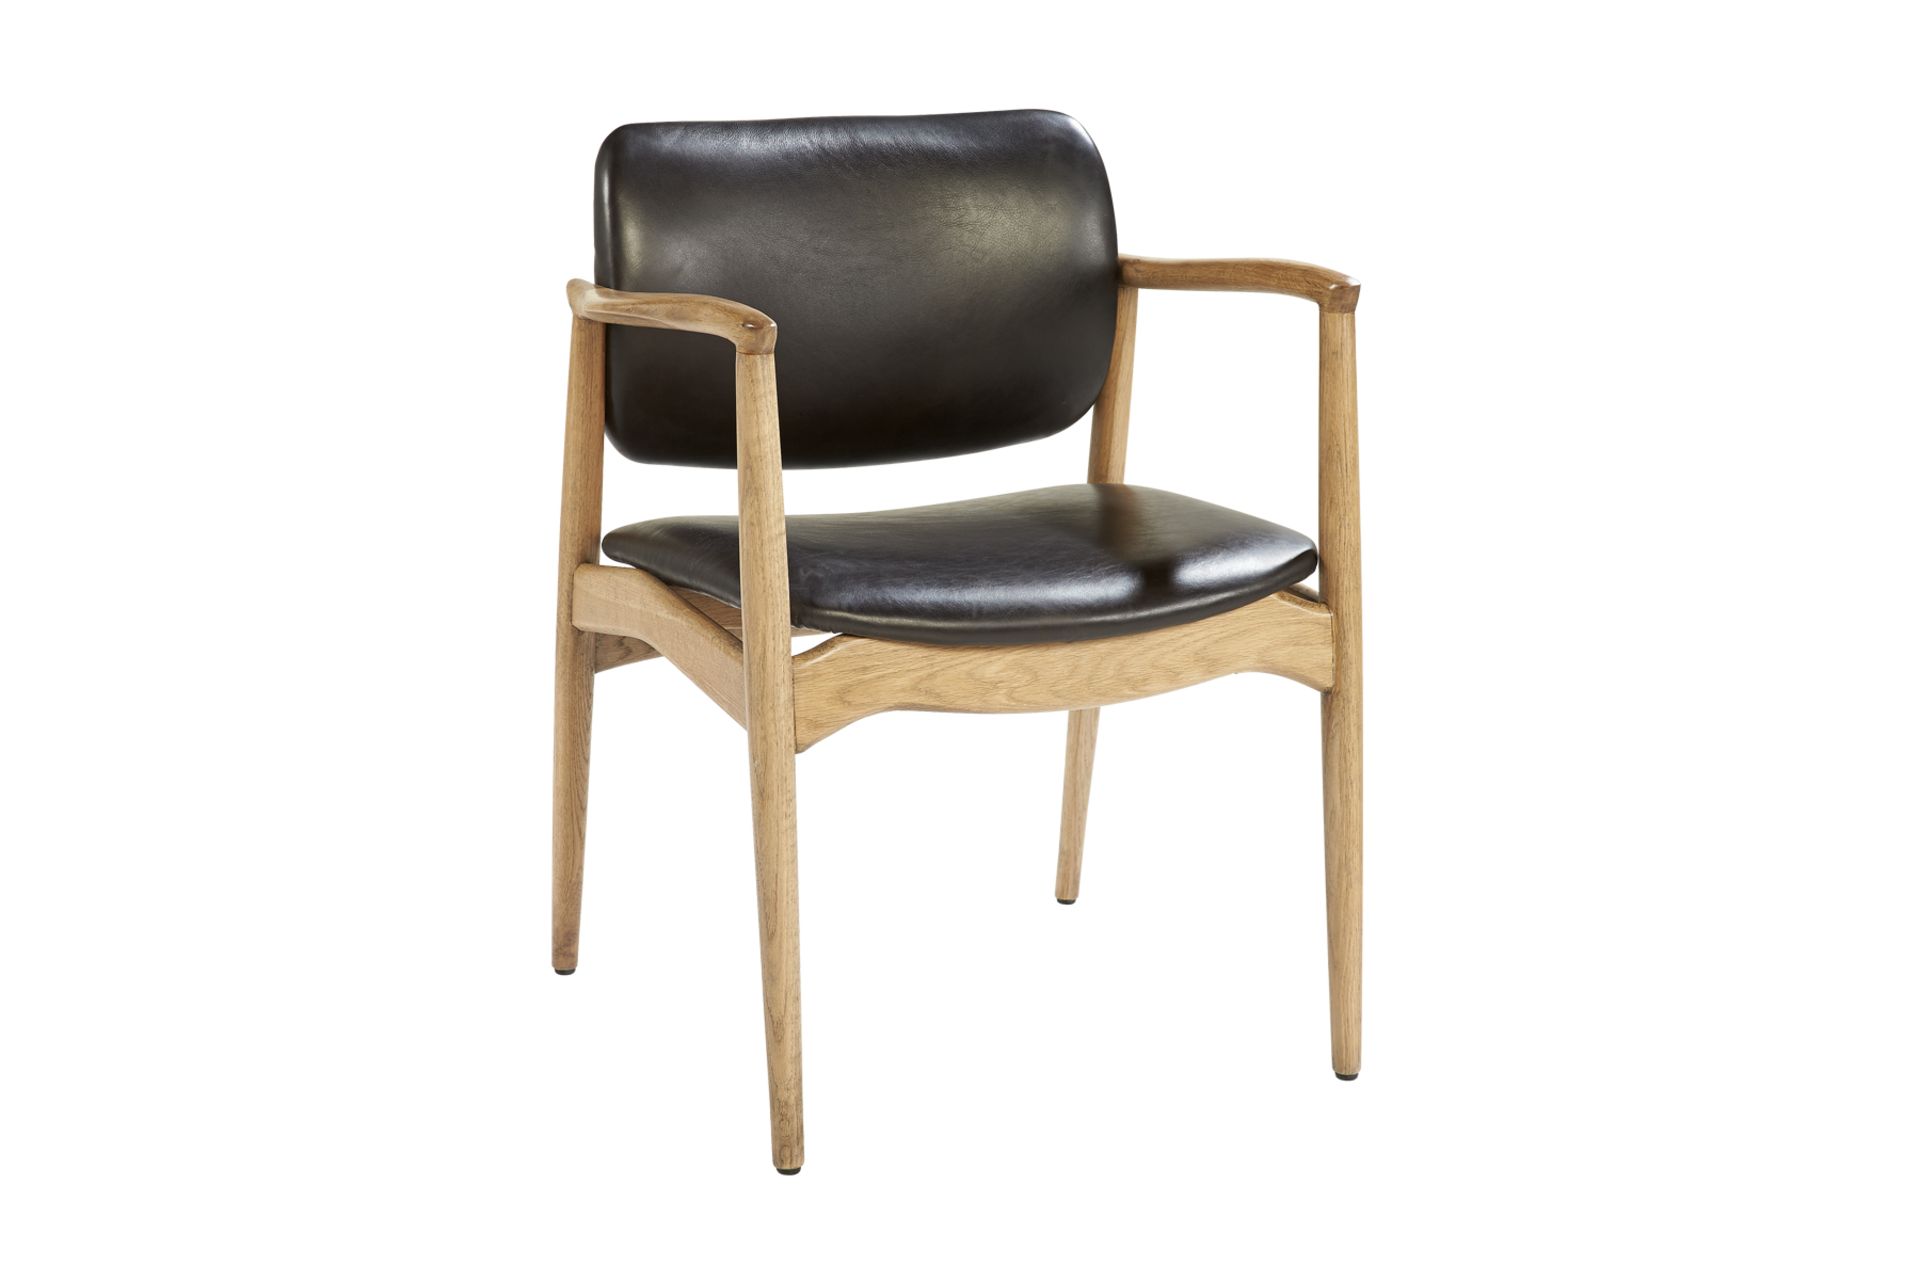 Cintique Chair Napinha Camel Leather & Weathered Oak The Cintique Chair Has Been Inspired By